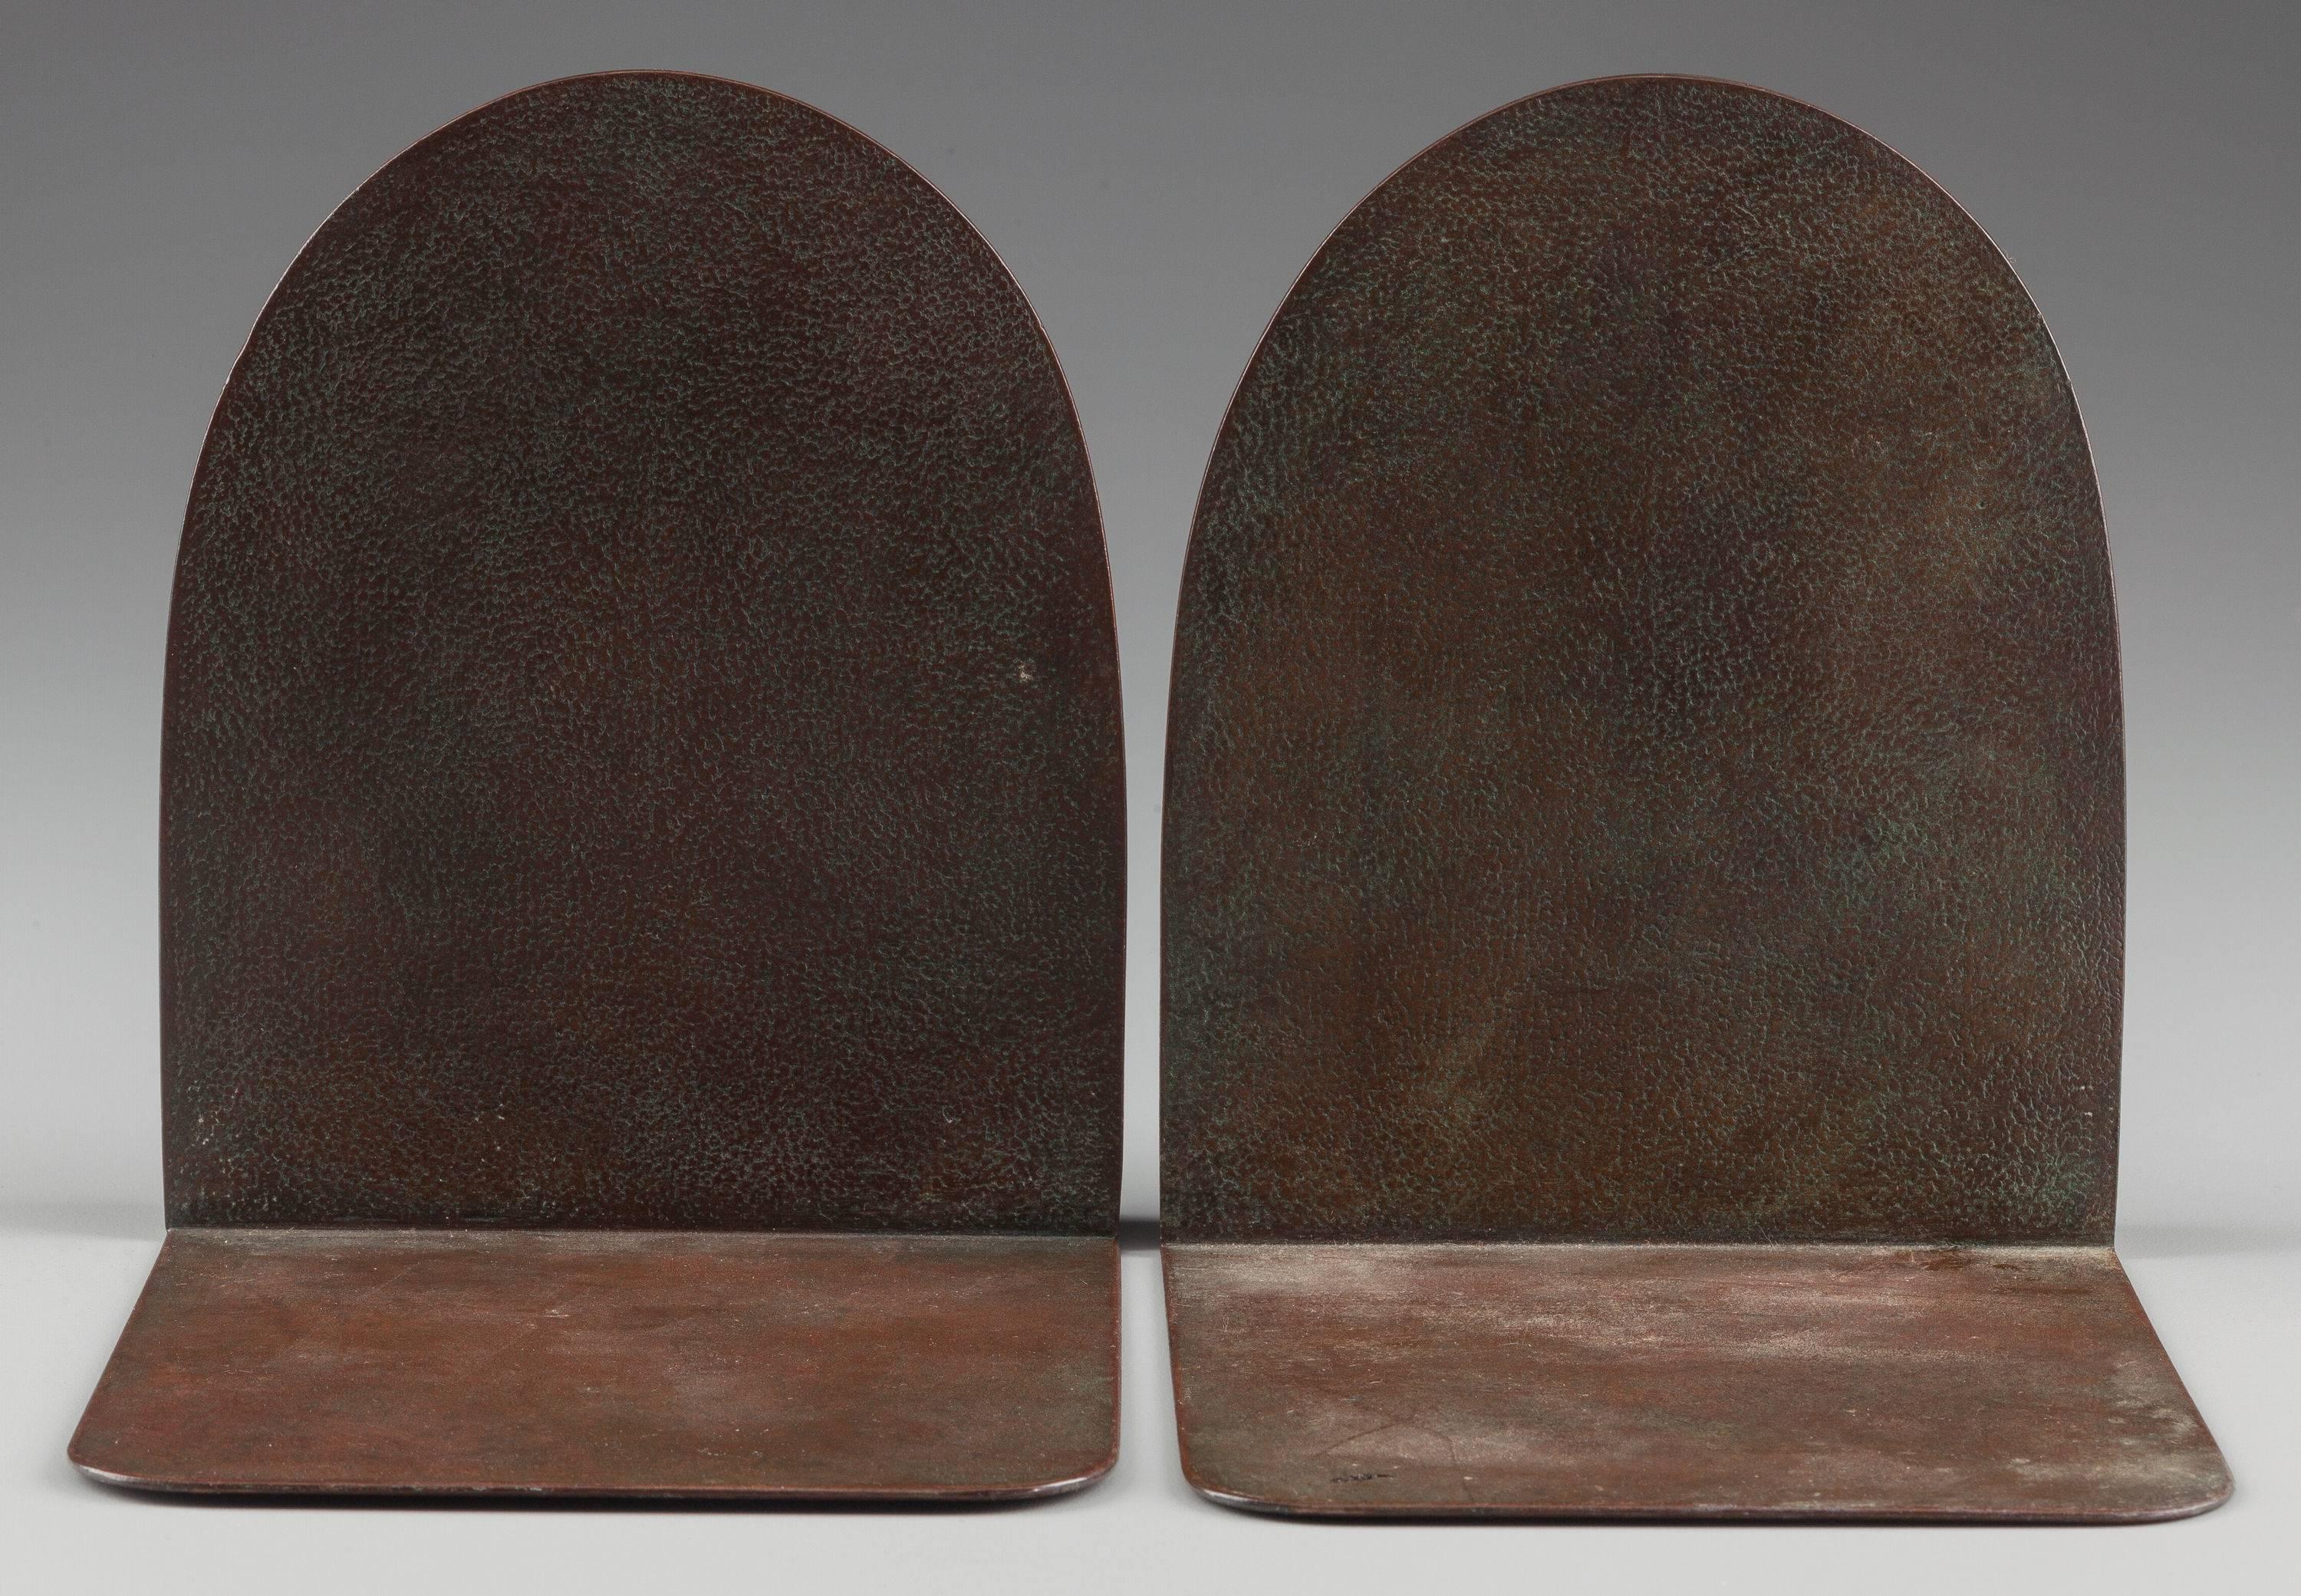 Tiffany Studios “BUDDHA” bookends. #1025 fine Tiffany sculpture bookends are impressed in the bronze statue form of Buddha beneath an arched background. Bookends are finished with a rich reddish brown and green finish and signed on the tongue